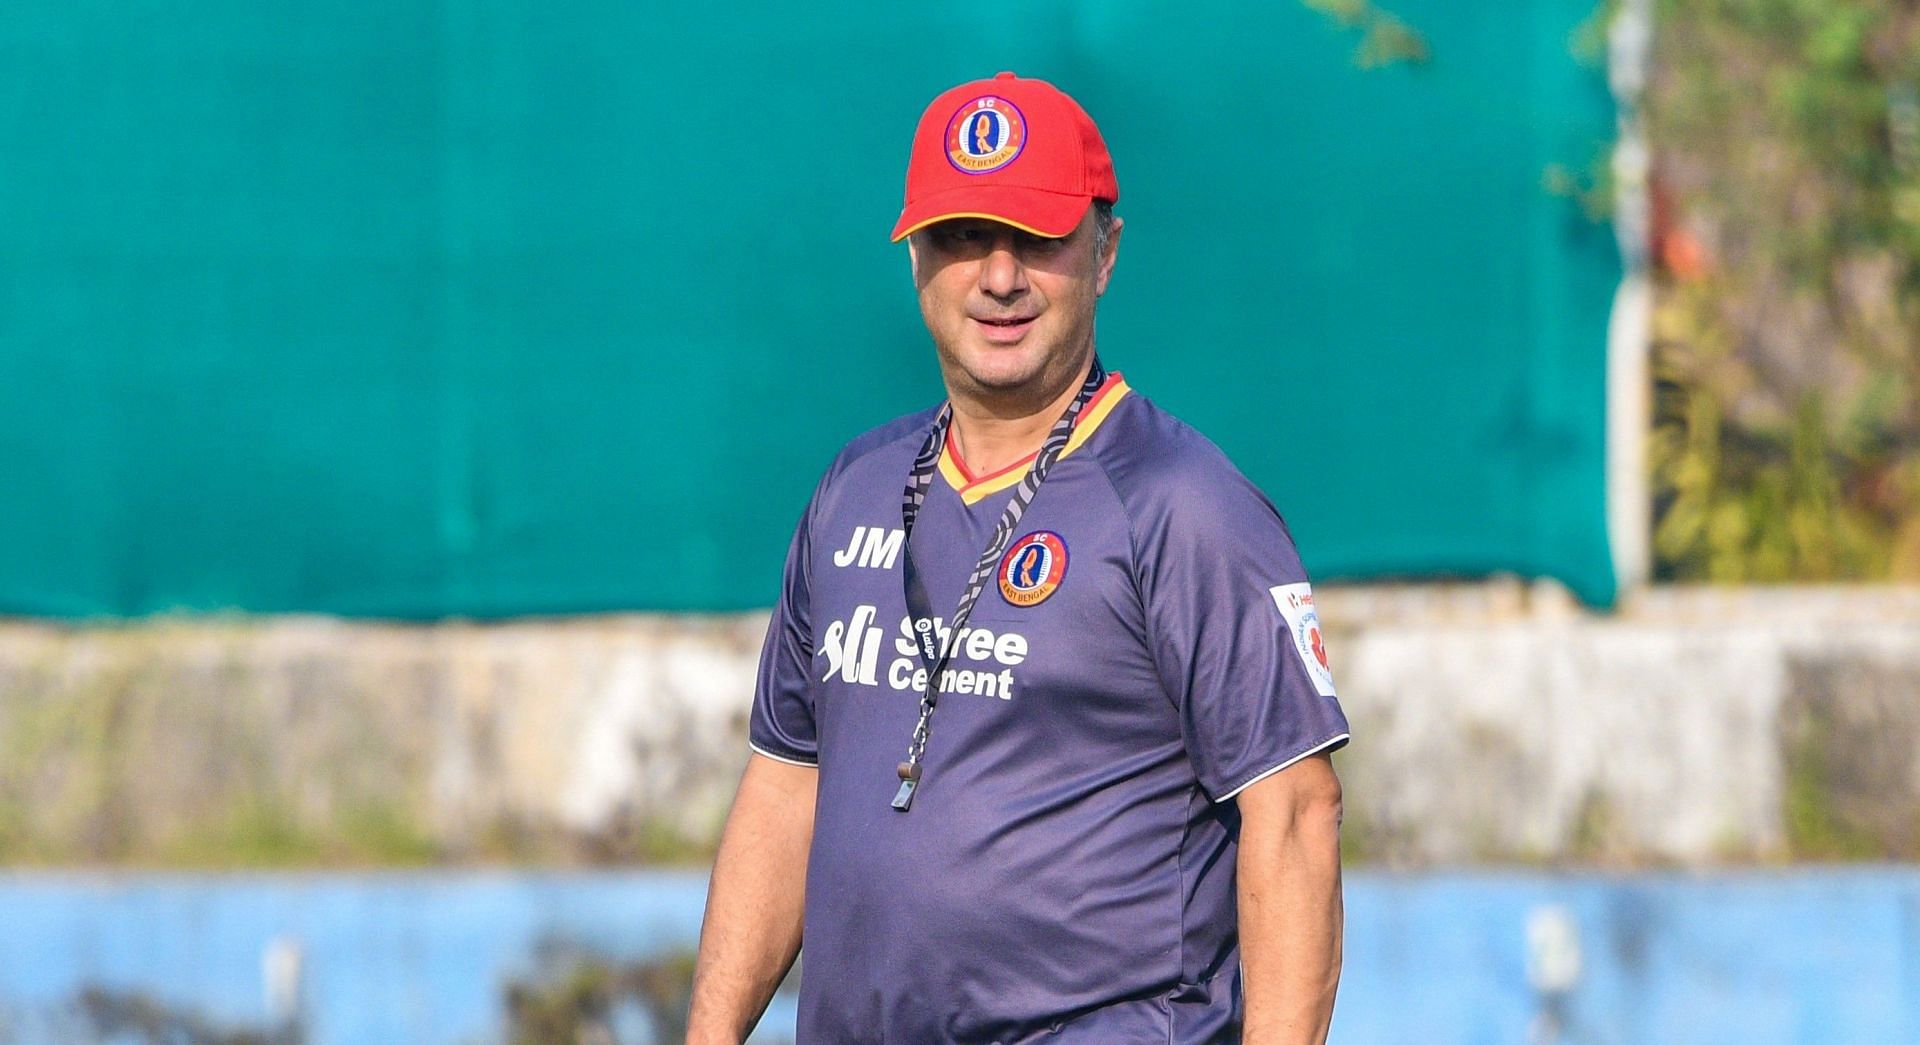 SC East Bengal head coach Manolo Diaz watches on as players train. (Image Courtesy: Twitter/sc_eastbengal)